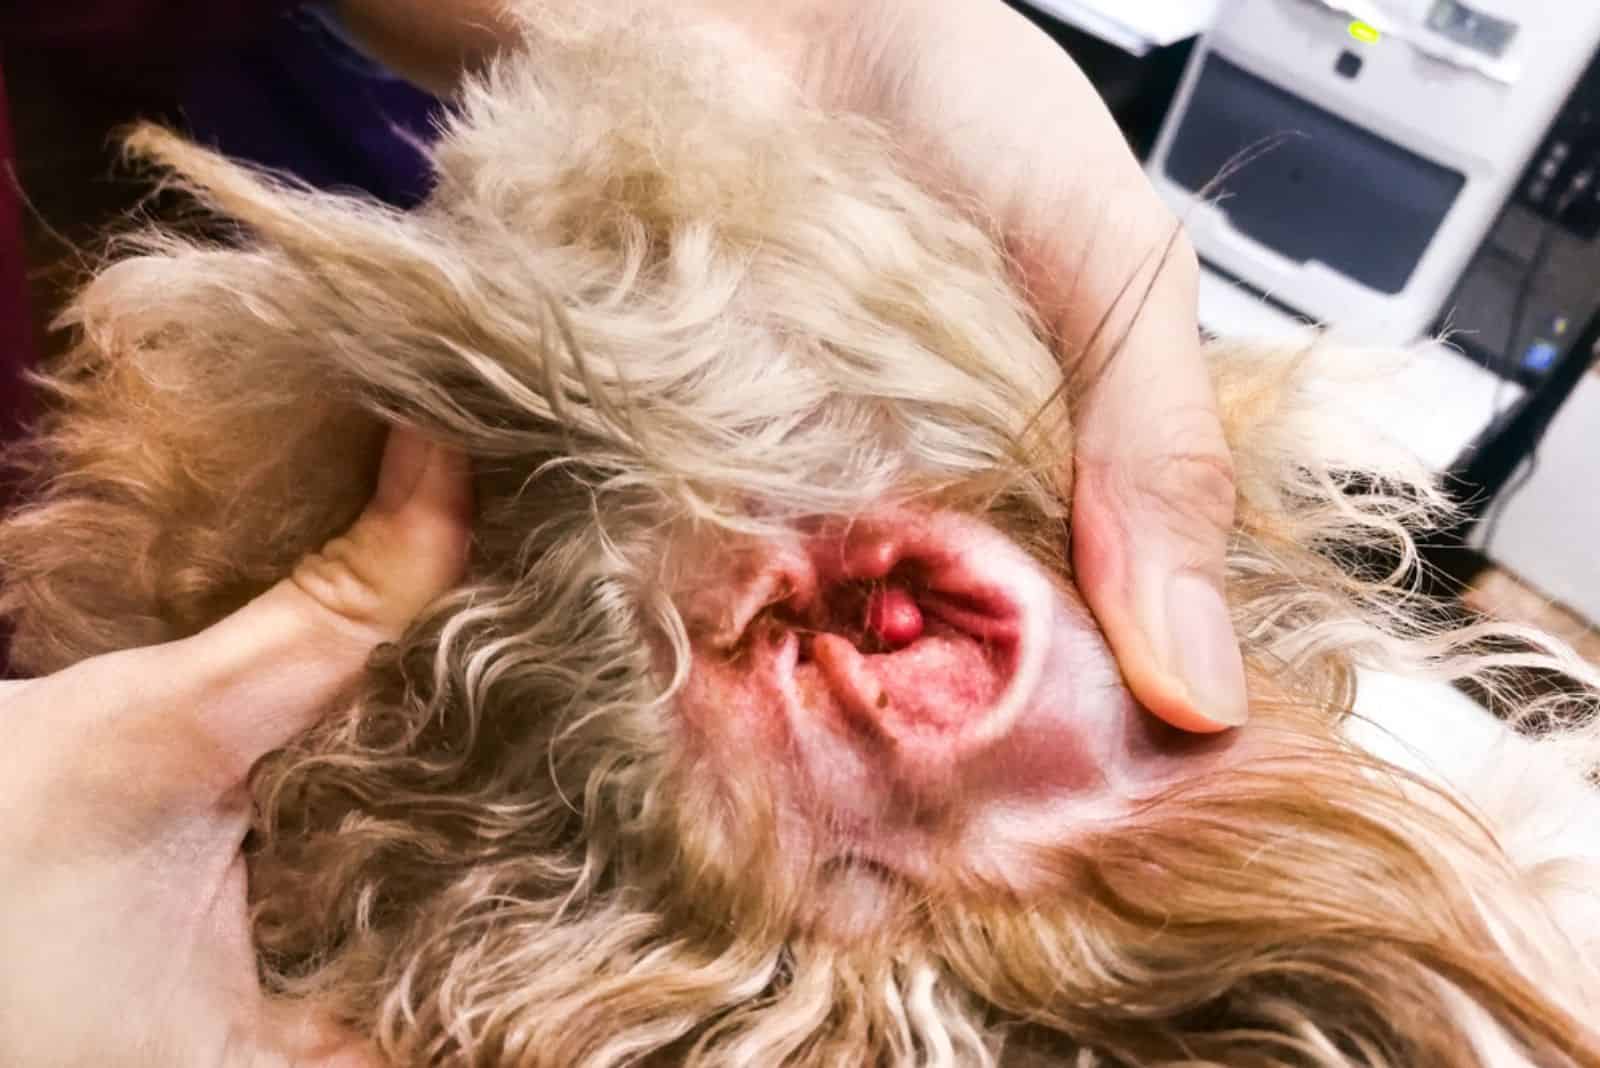 Vet examining inflammed ear infection of pet dog in clinic